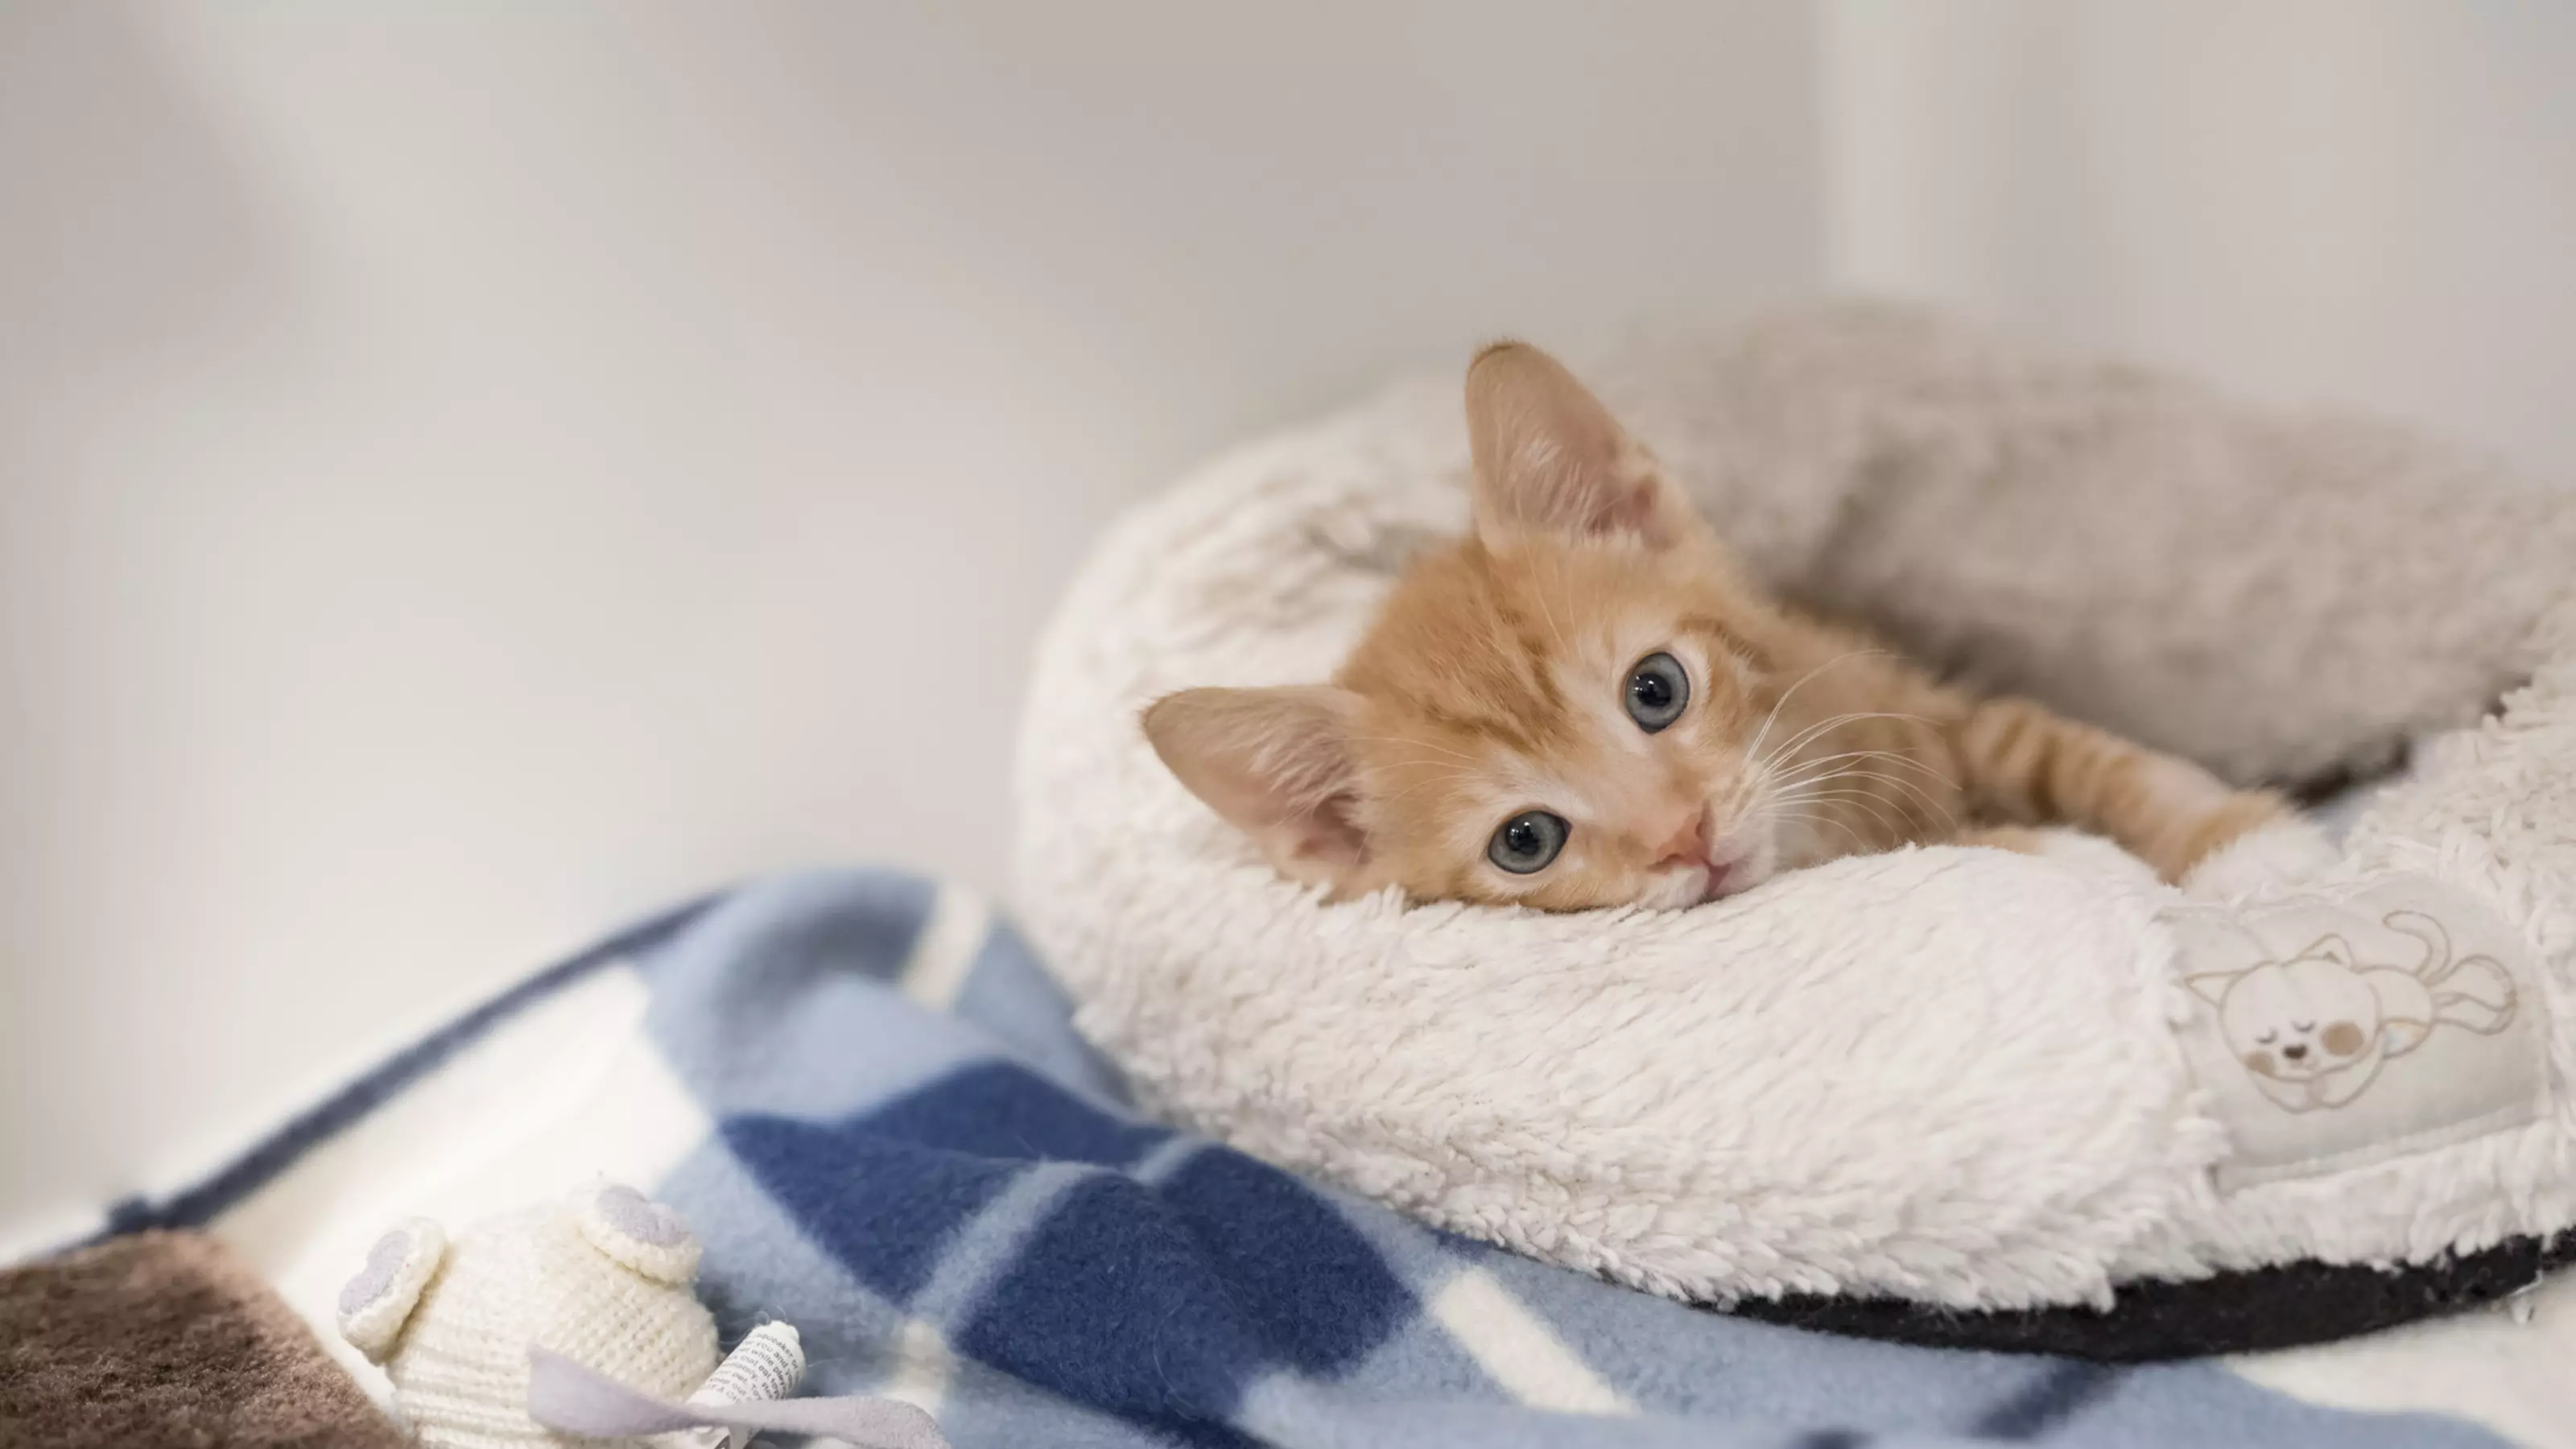 Ginger kitten lying in a cat bed with a white cat toy